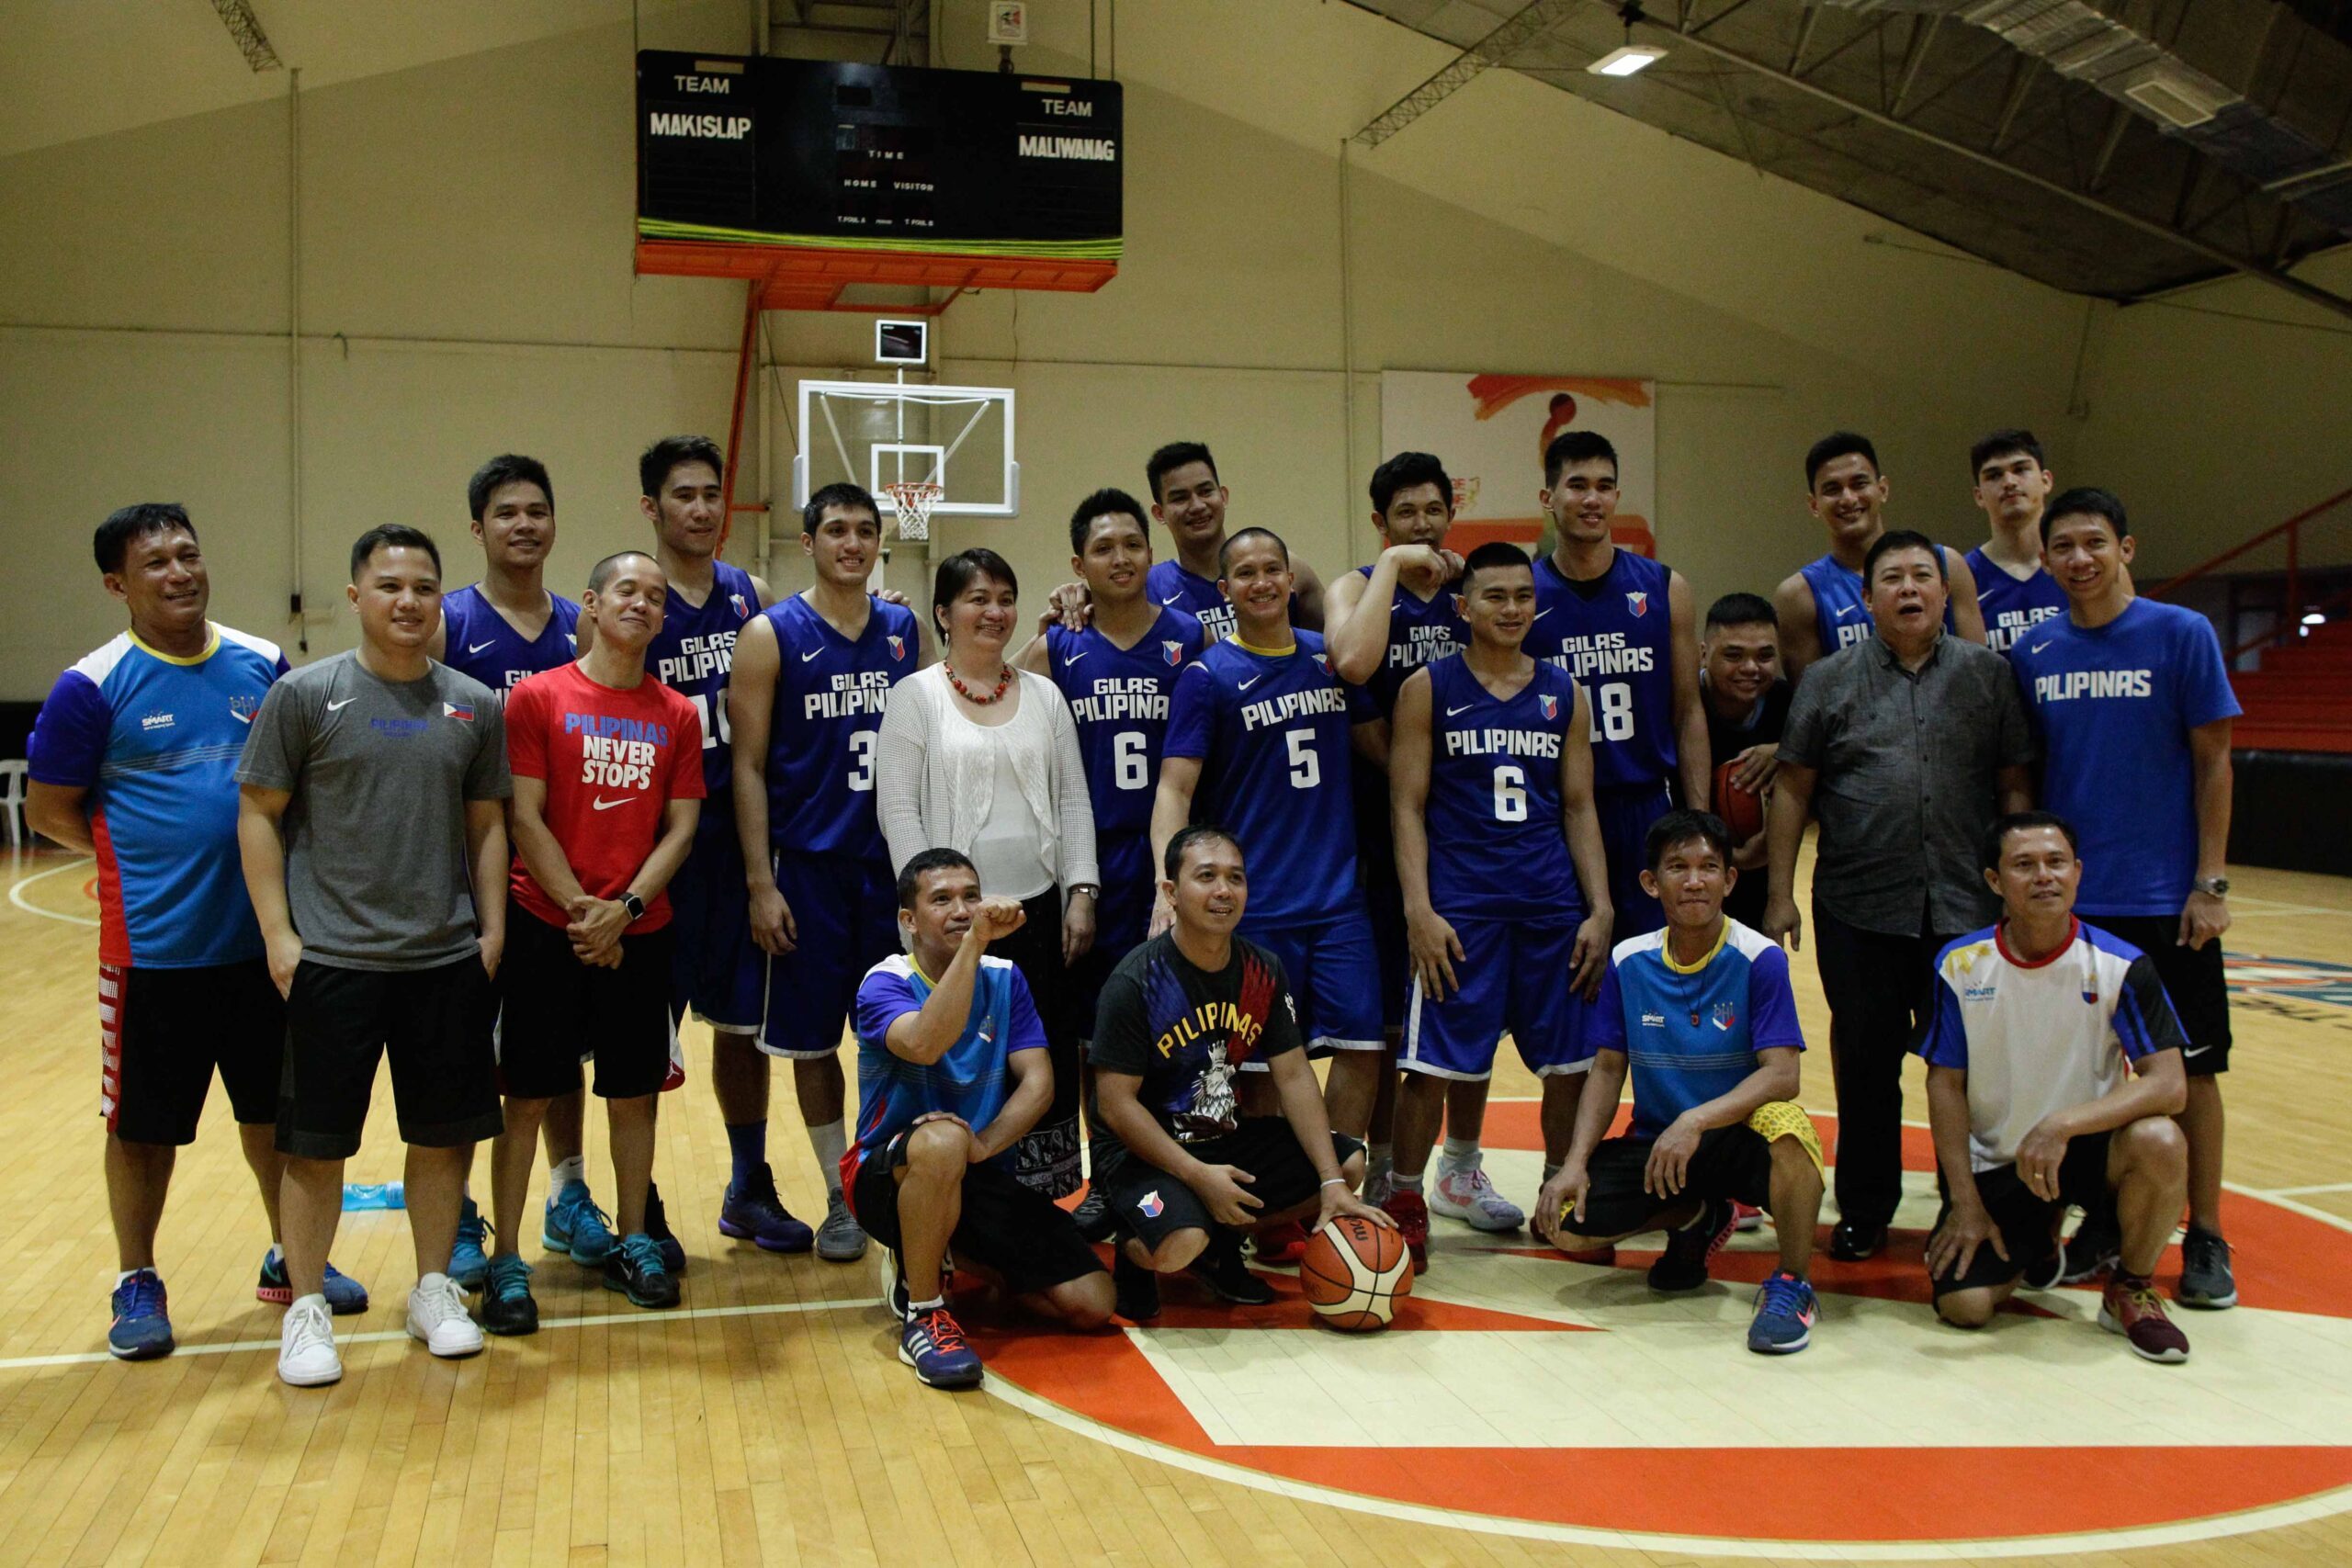 Philippines rips Thailand late to become 2016 SEABA Cup champs